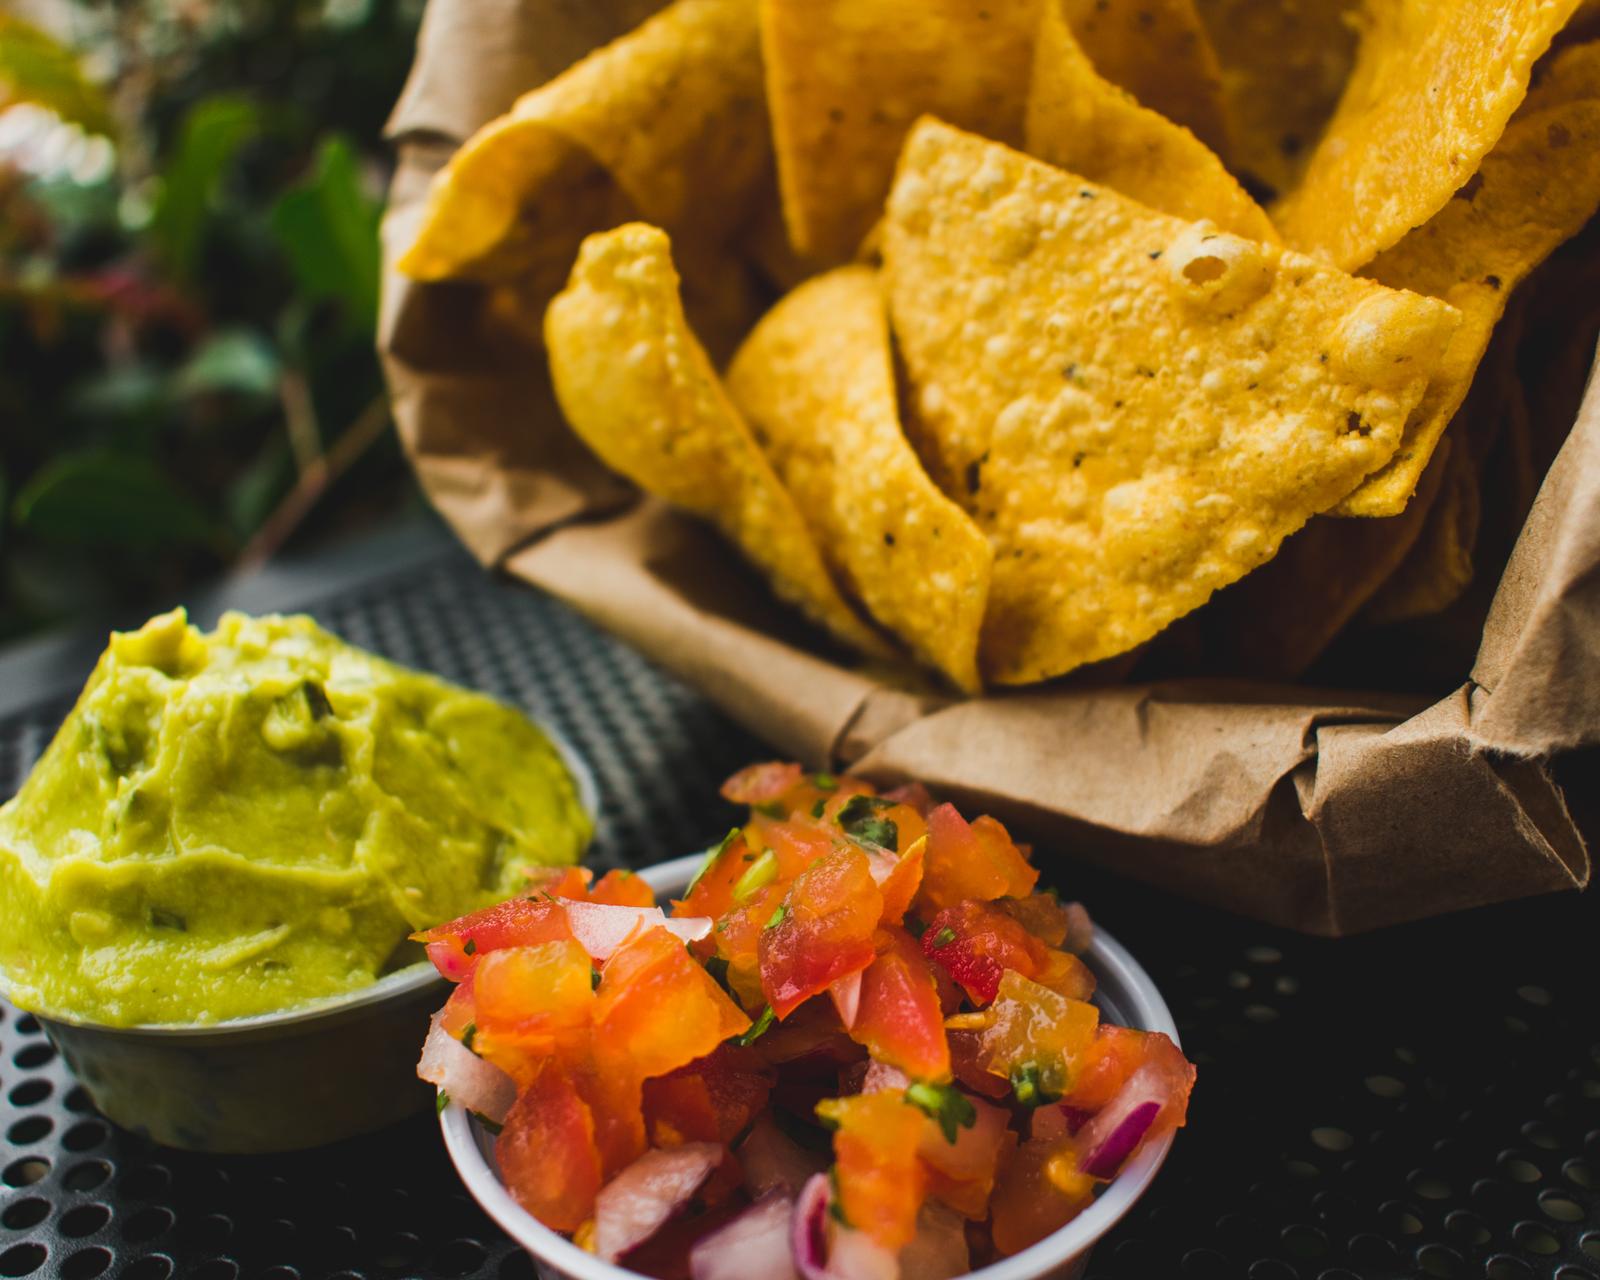 Chips with guacamole